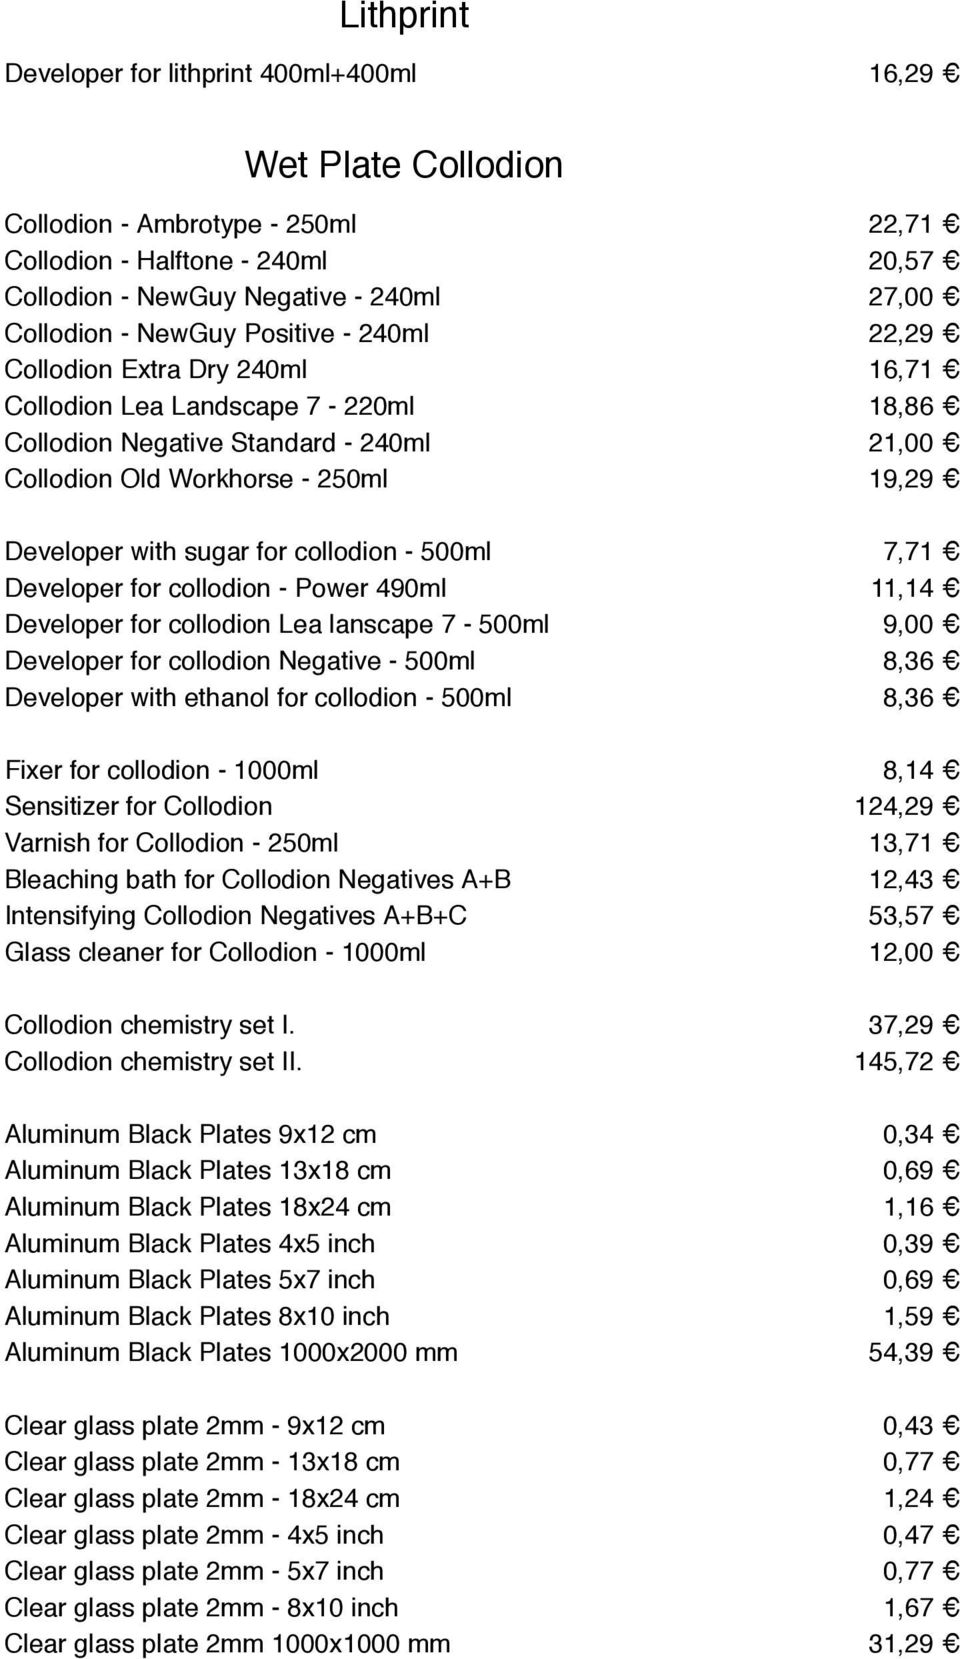 sugar for collodion - 500ml 7,71 Developer for collodion - Power 490ml 11,14 Developer for collodion Lea lanscape 7-500ml 9,00 Developer for collodion Negative - 500ml 8,36 Developer with ethanol for